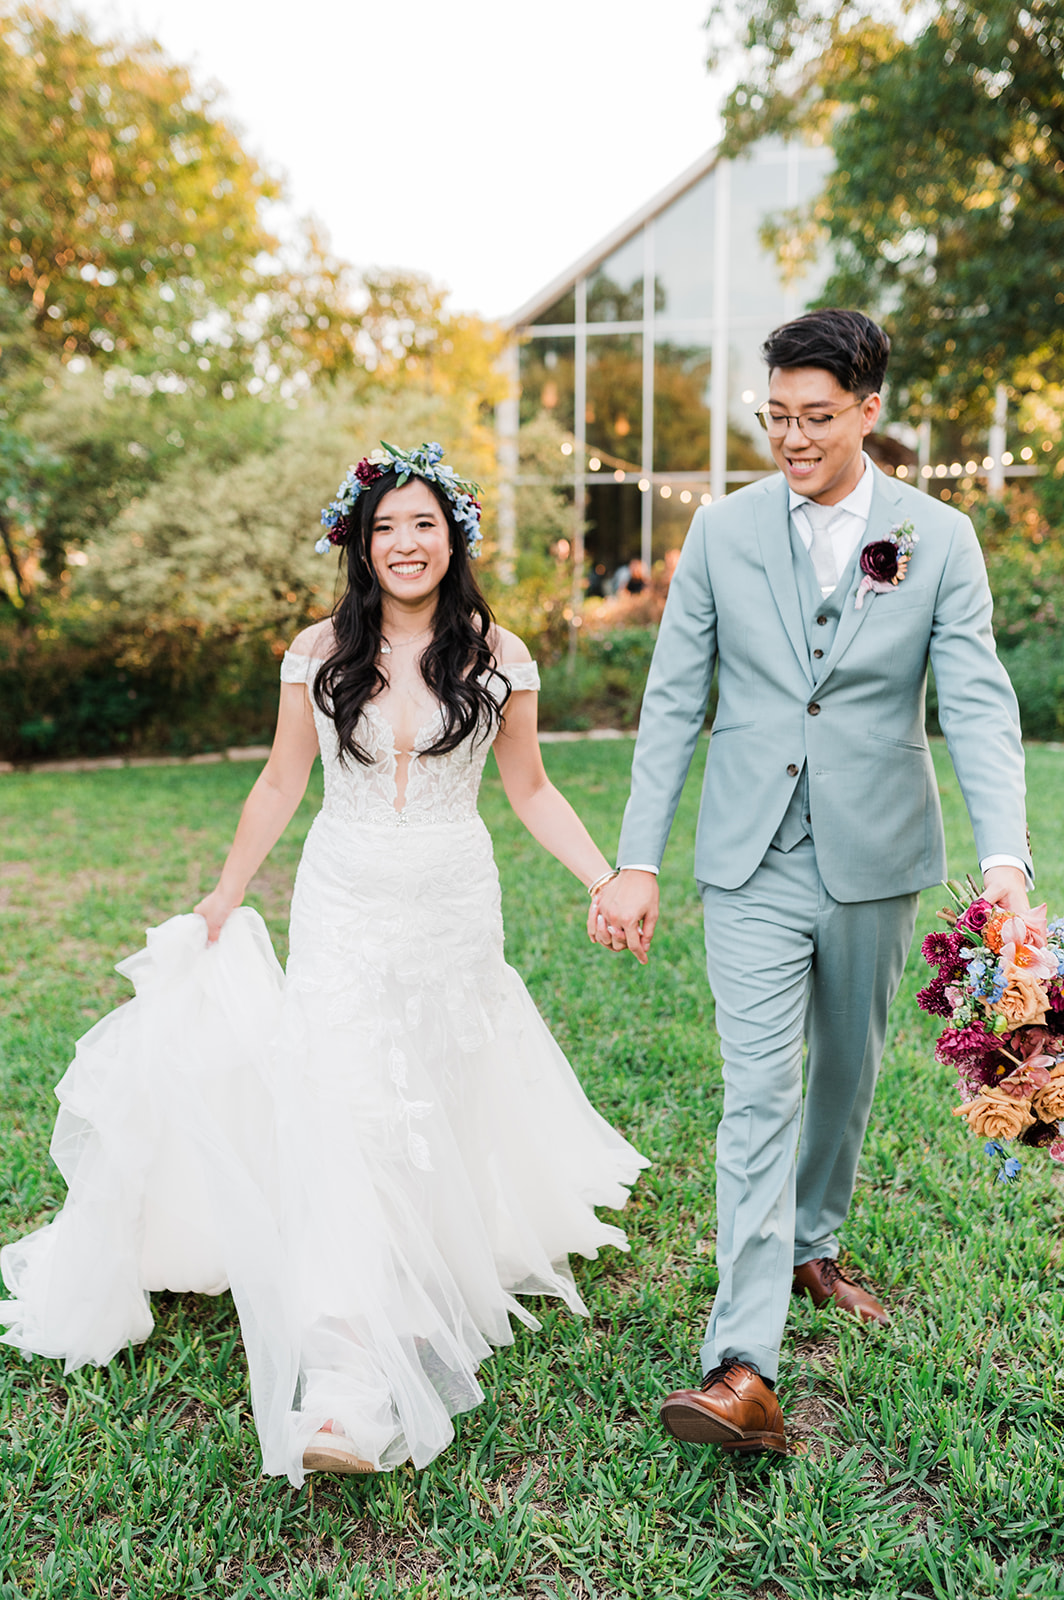 Bride walking with groom and wearing colorful flower crown